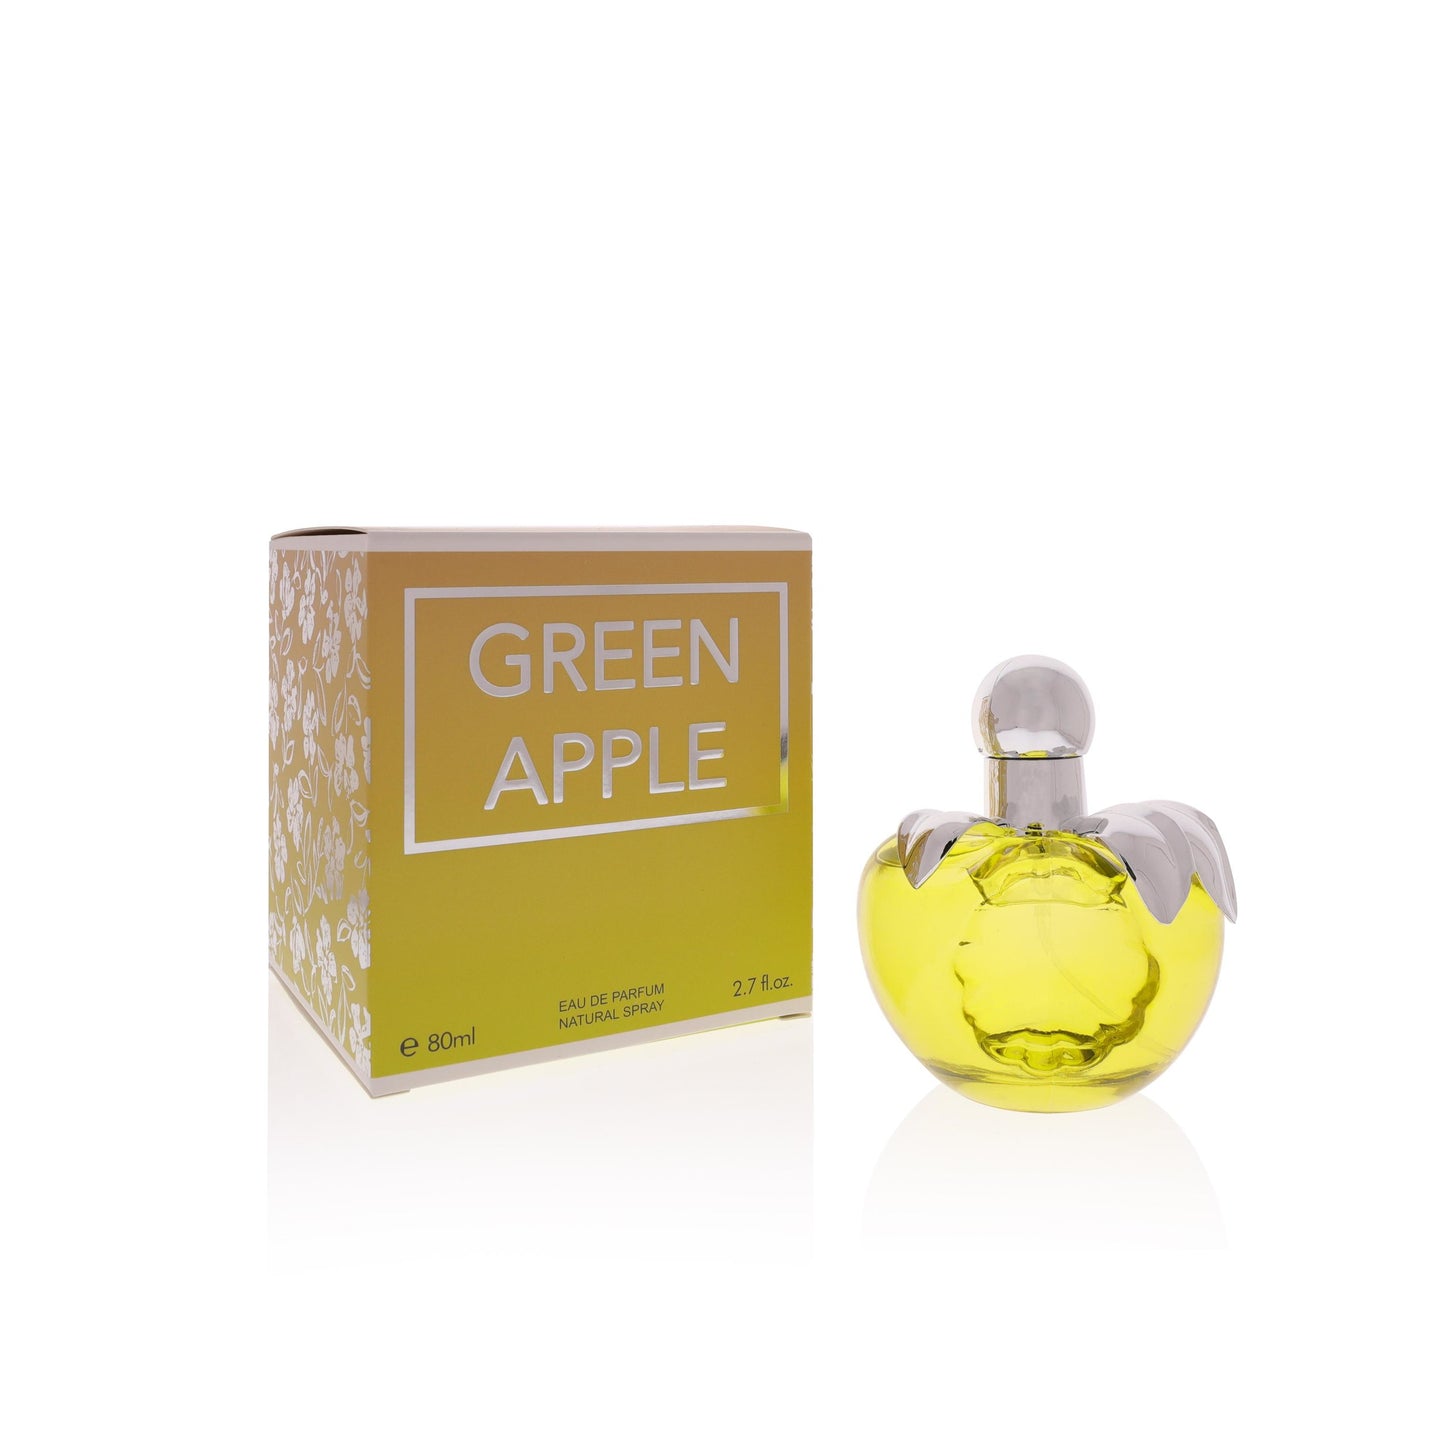 Green Apple Women's Fragrance: Experience the Crisp and Fresh Allure of Green Apples - A Captivating Scent for Every Modern Woman's Collection, Perfect for Day or Night!